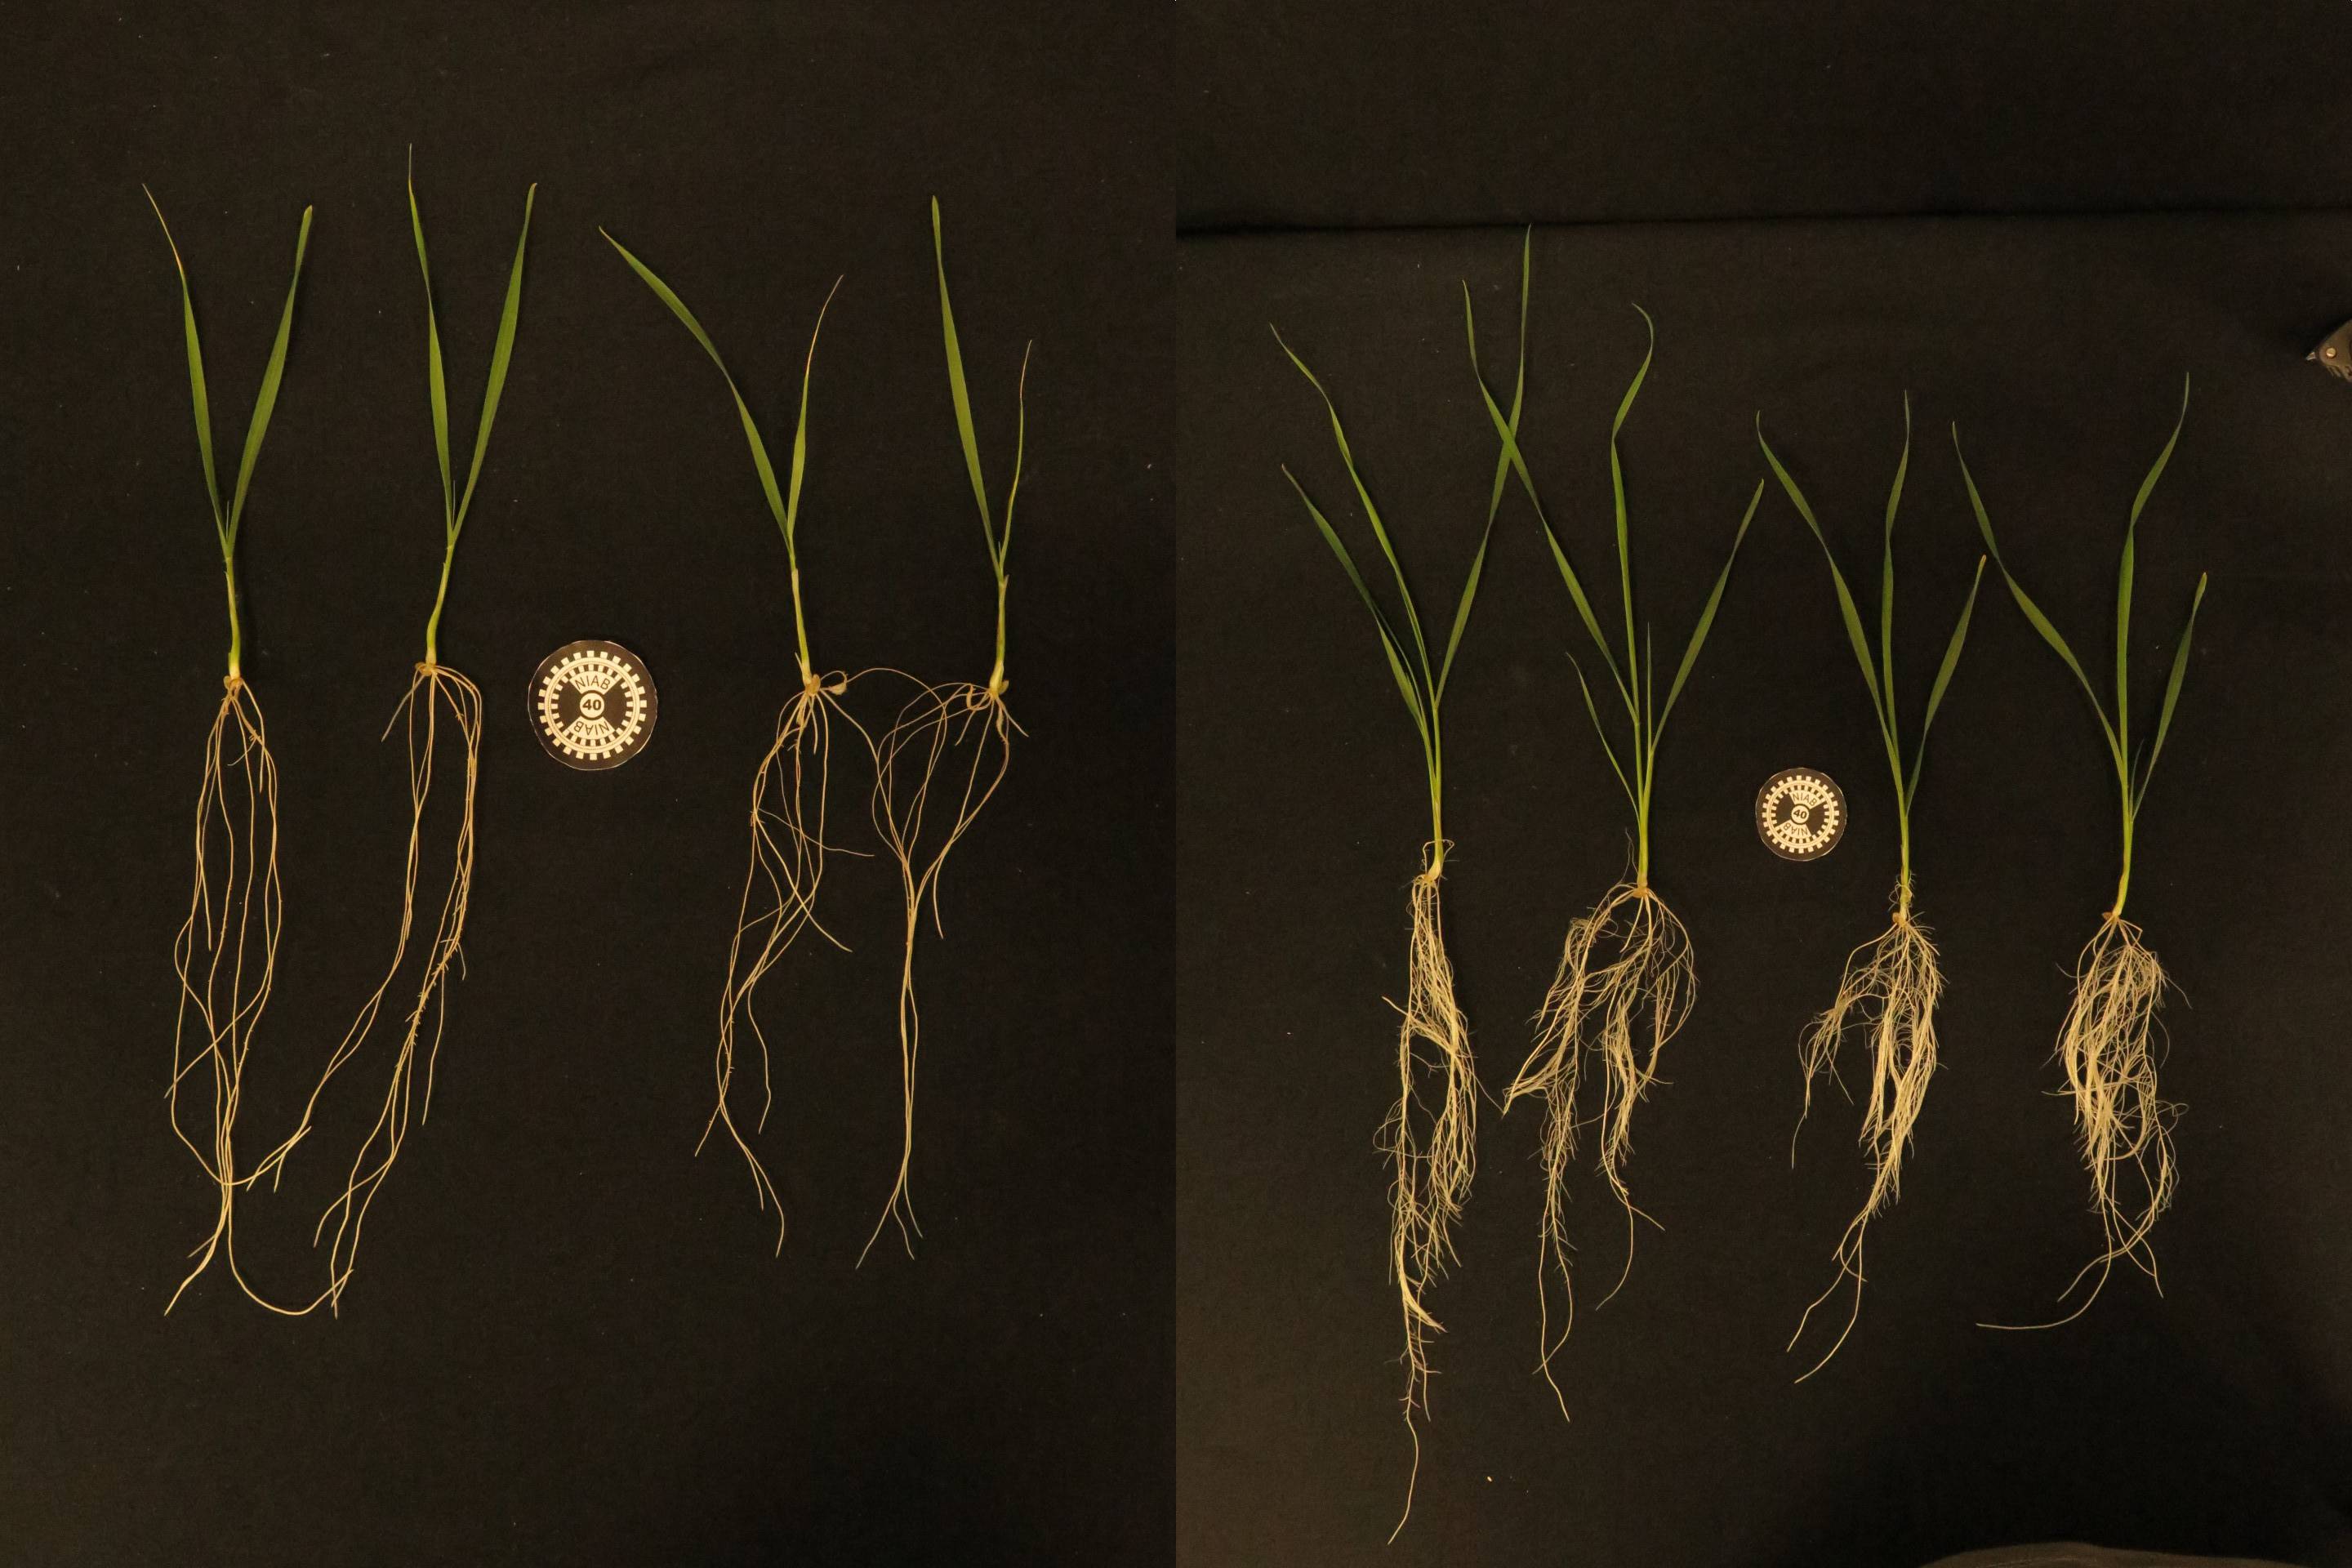 Wheat plants in nitrogen overexpression experiment